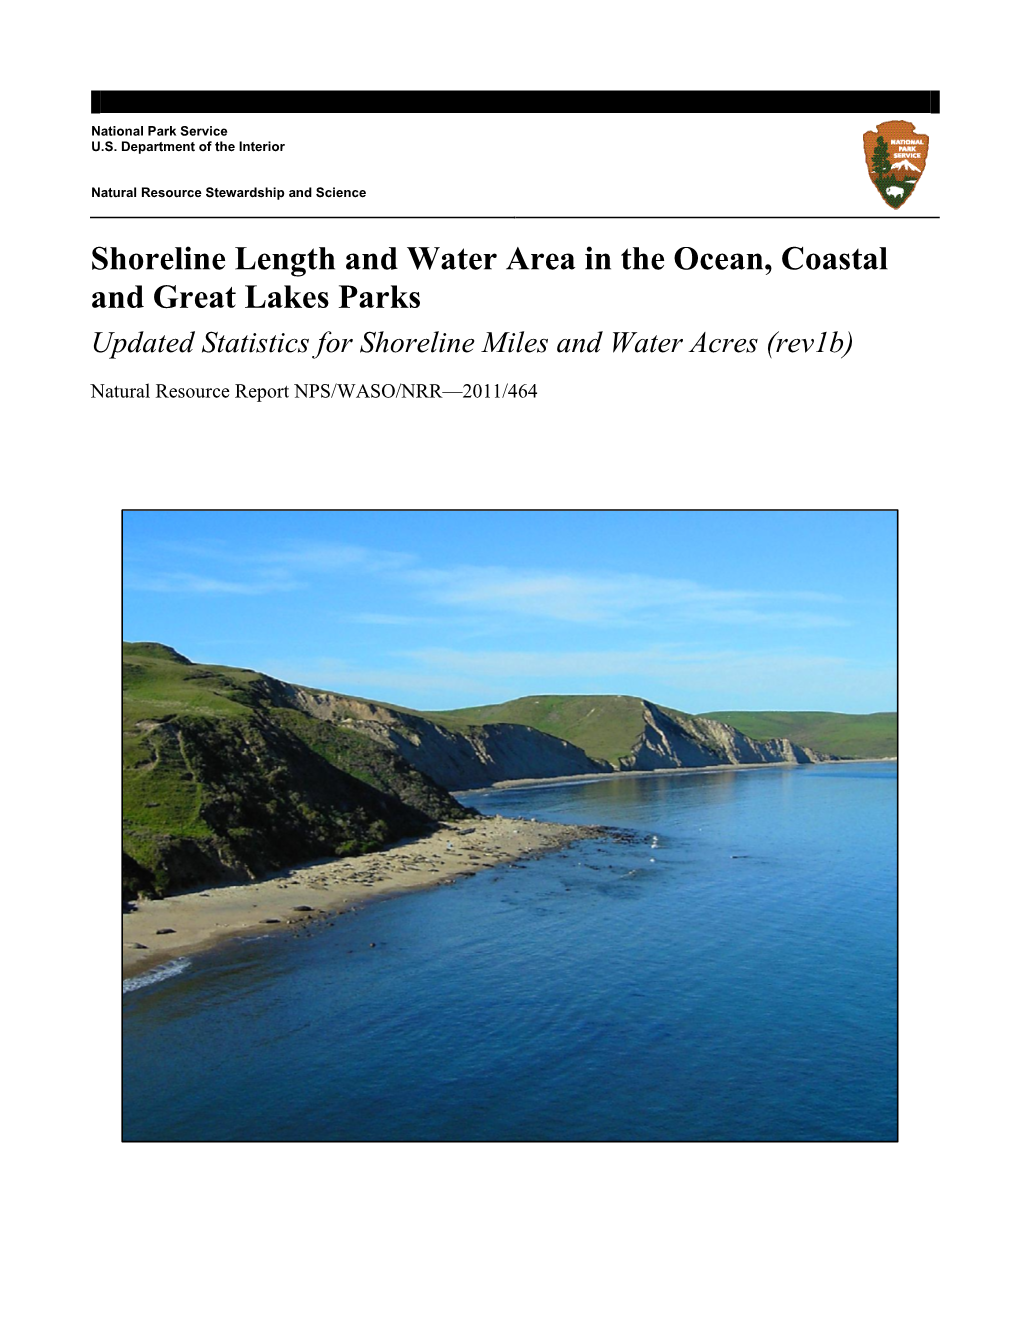 Shoreline Length and Water Area in the Ocean, Coastal and Great Lakes Parks Updated Statistics for Shoreline Miles and Water Acres (Rev1b)